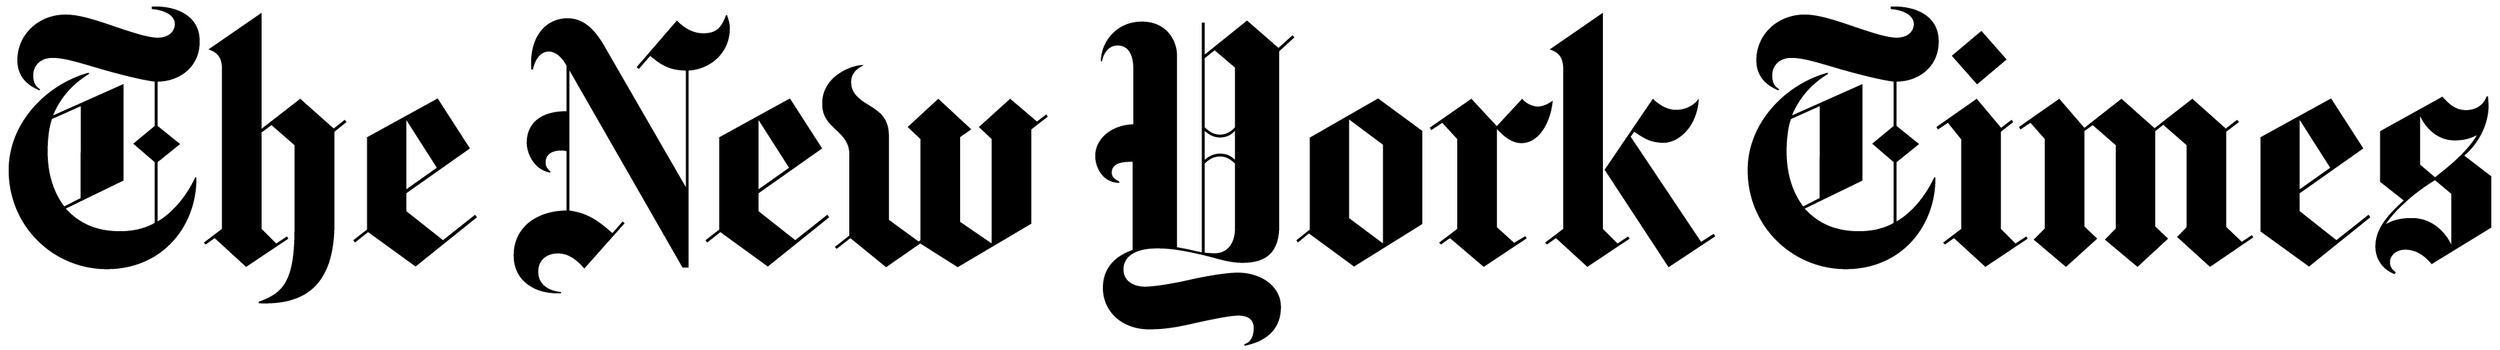 NYT approved logo (1).png